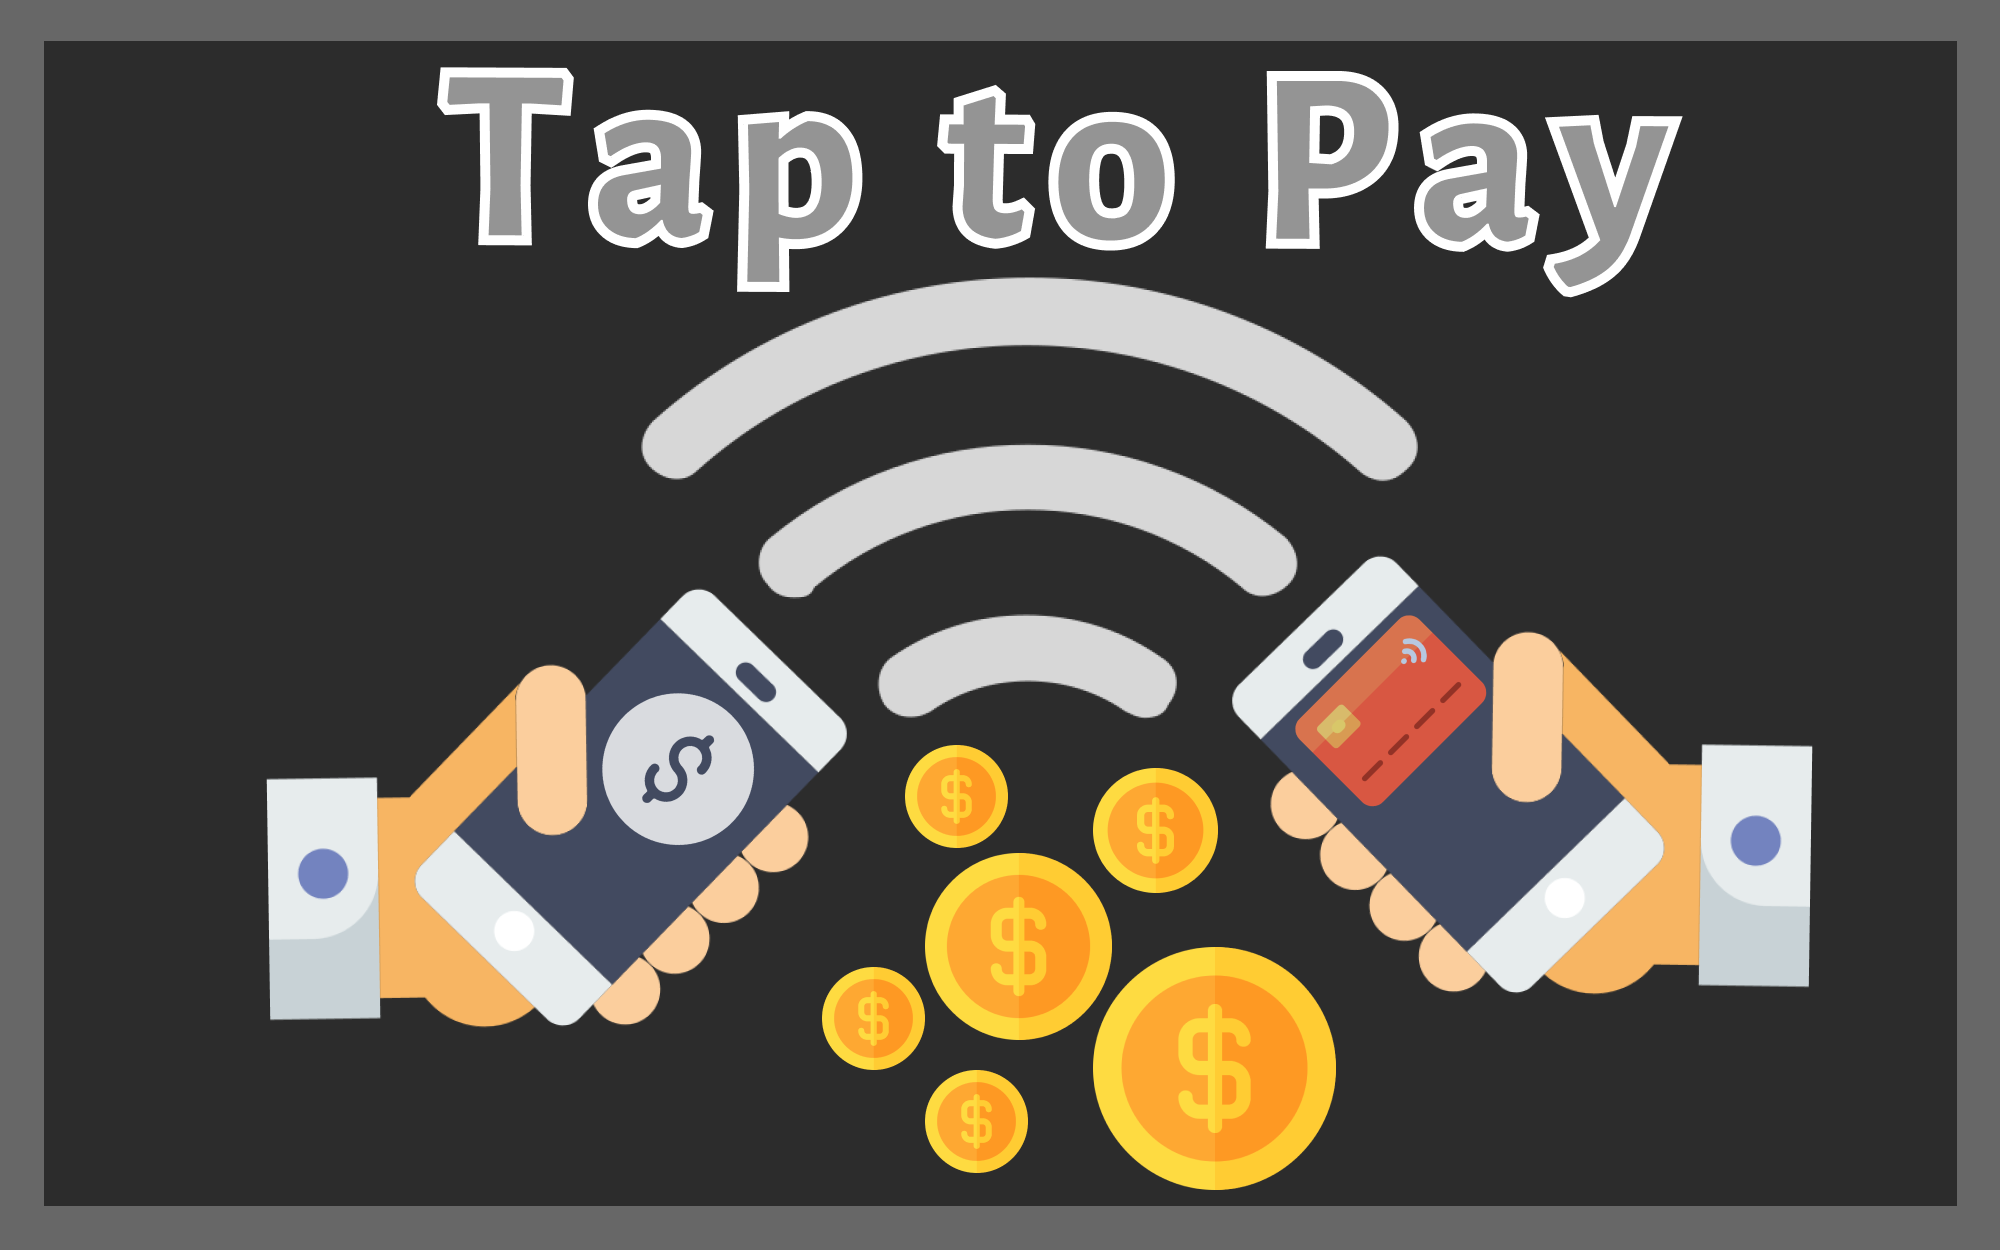 Tap to Pay: Accept Payments Through Your Phone